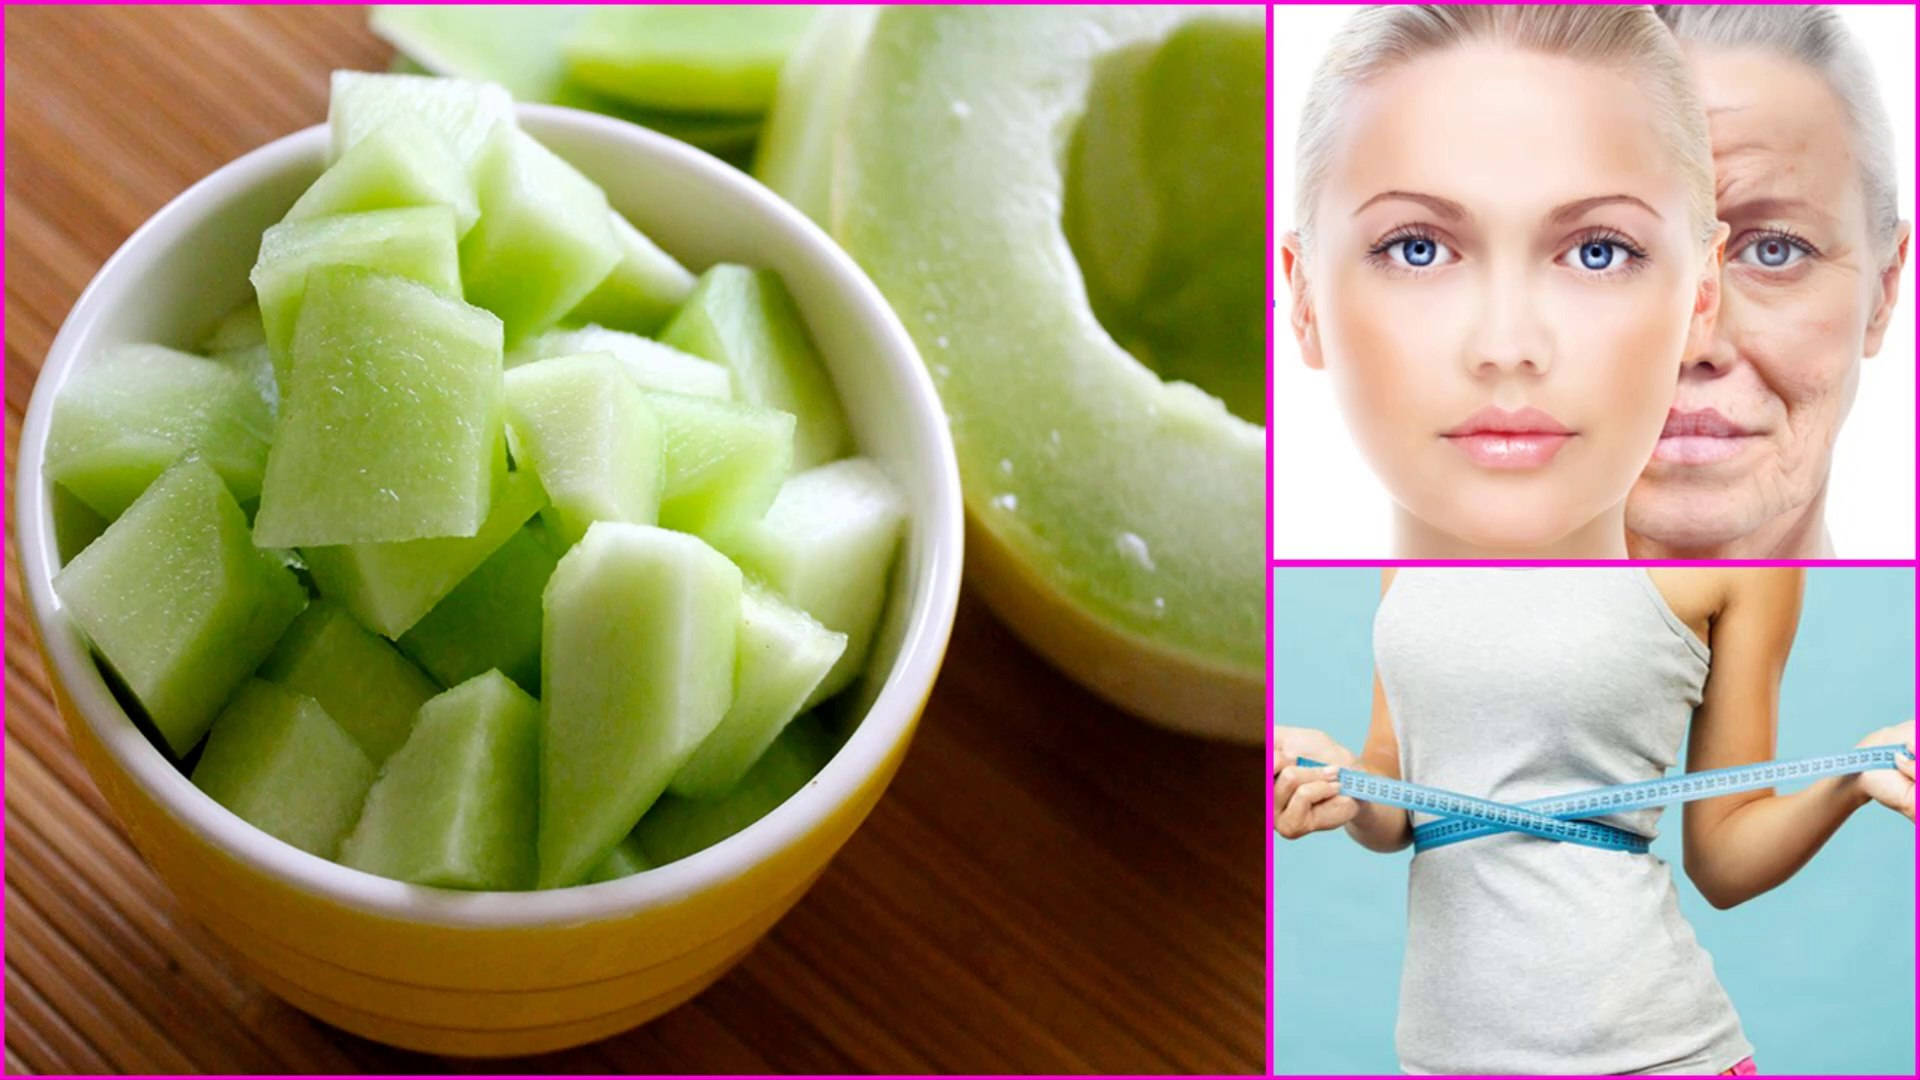 Fresh and Juicy Honeydew Melon for a Healthy Lifestyle Wallpaper